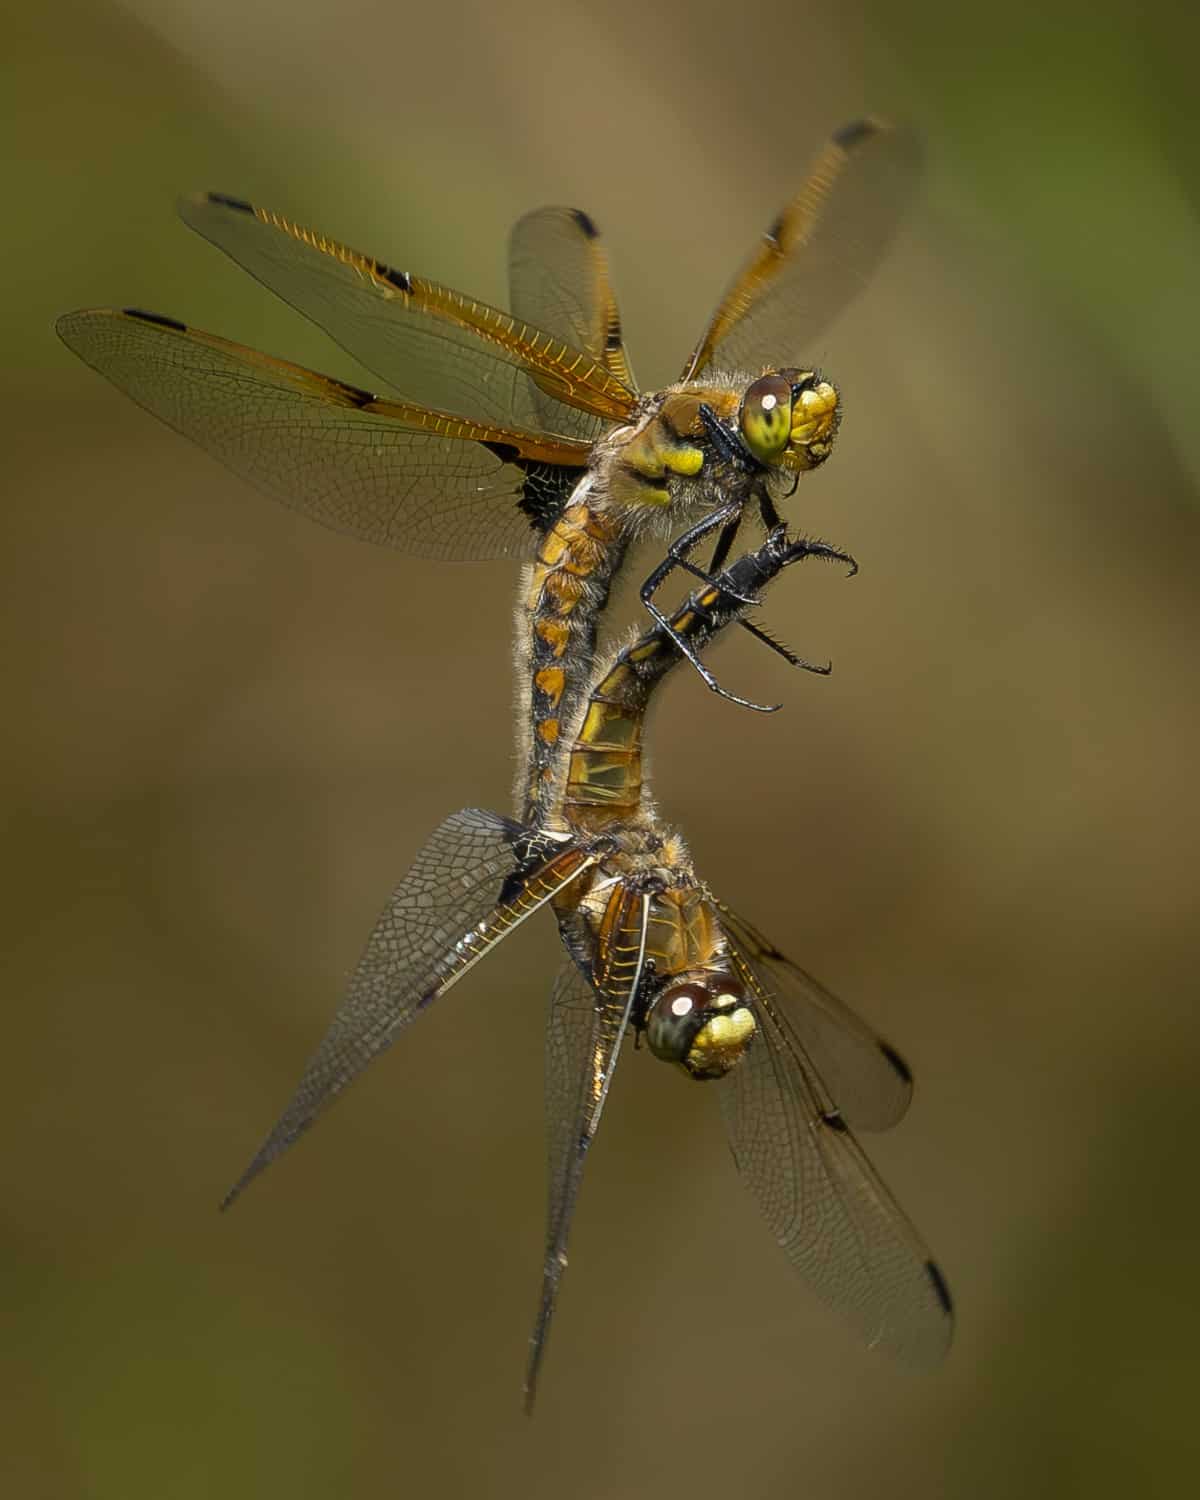 A pair of Four-spotted skimmer dragonflies (Libellula quadrimaculata) release from one another after mating in-flight.